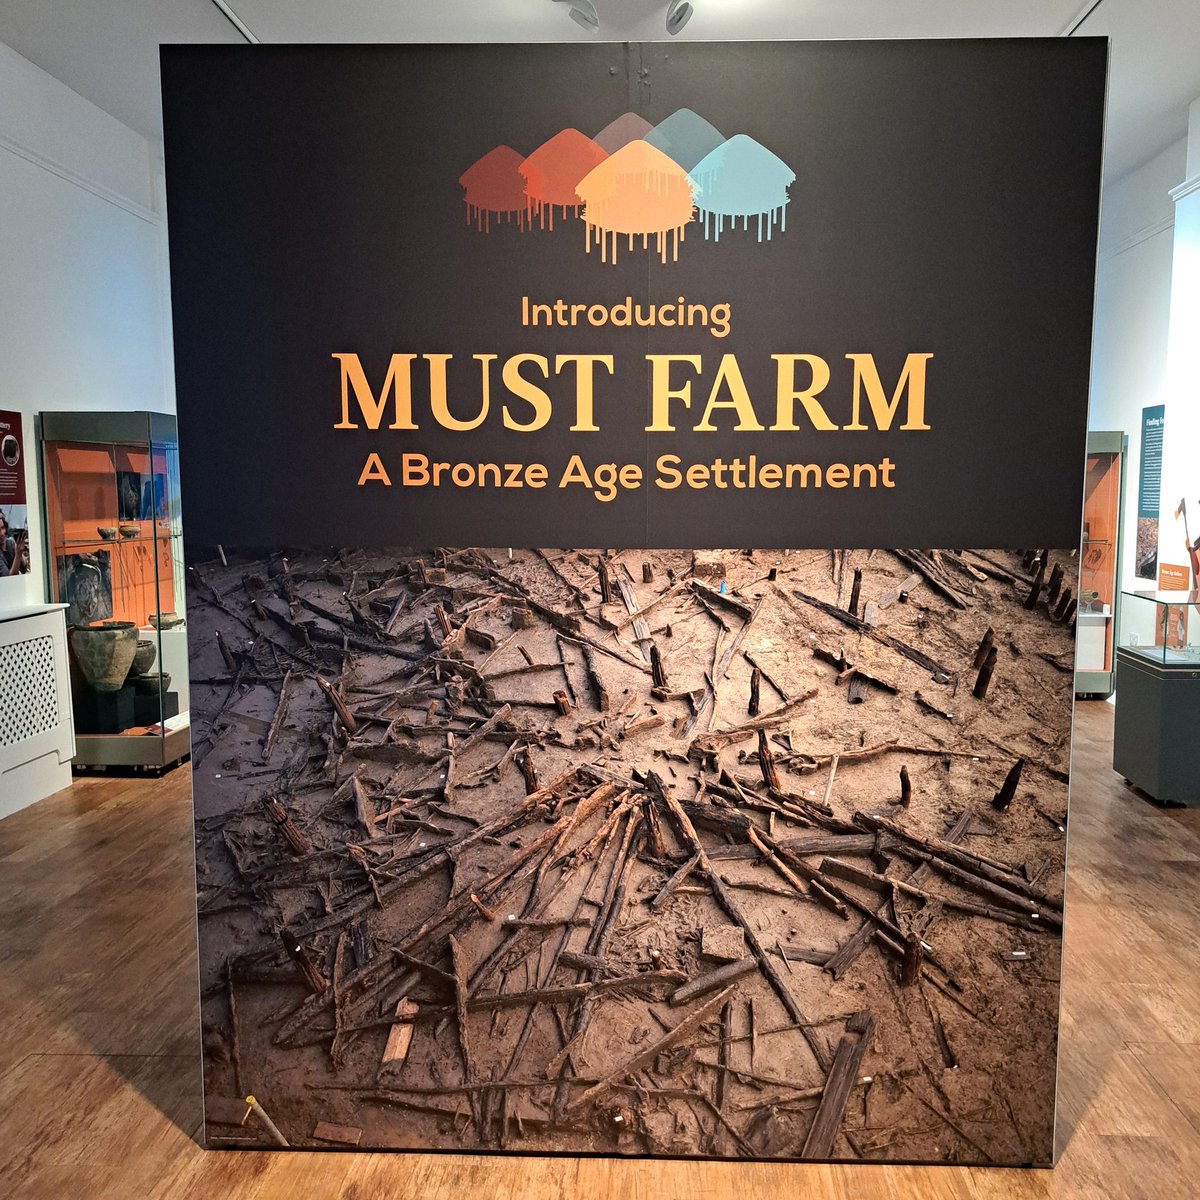 At the opening of the excellent new introducing @MustFarm exhibition at #PeterboroughMuseum